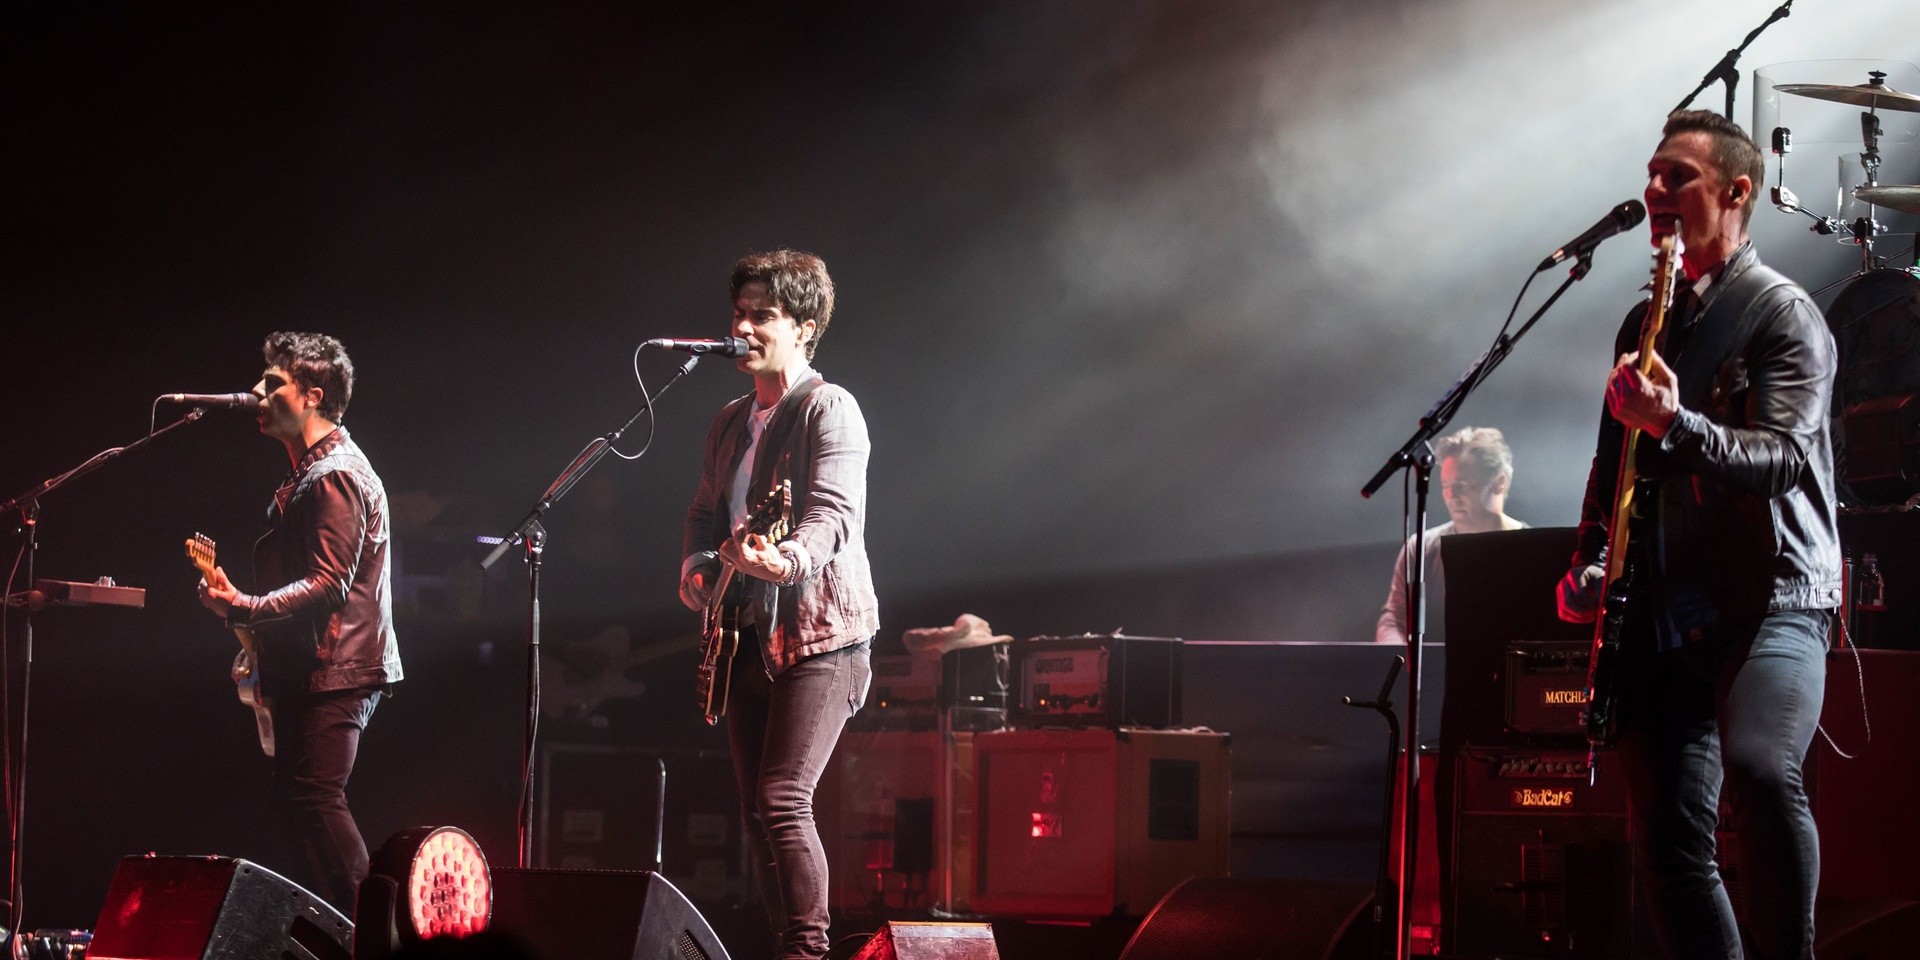 To the past and present: All In One Night with Stereophonics – gig report